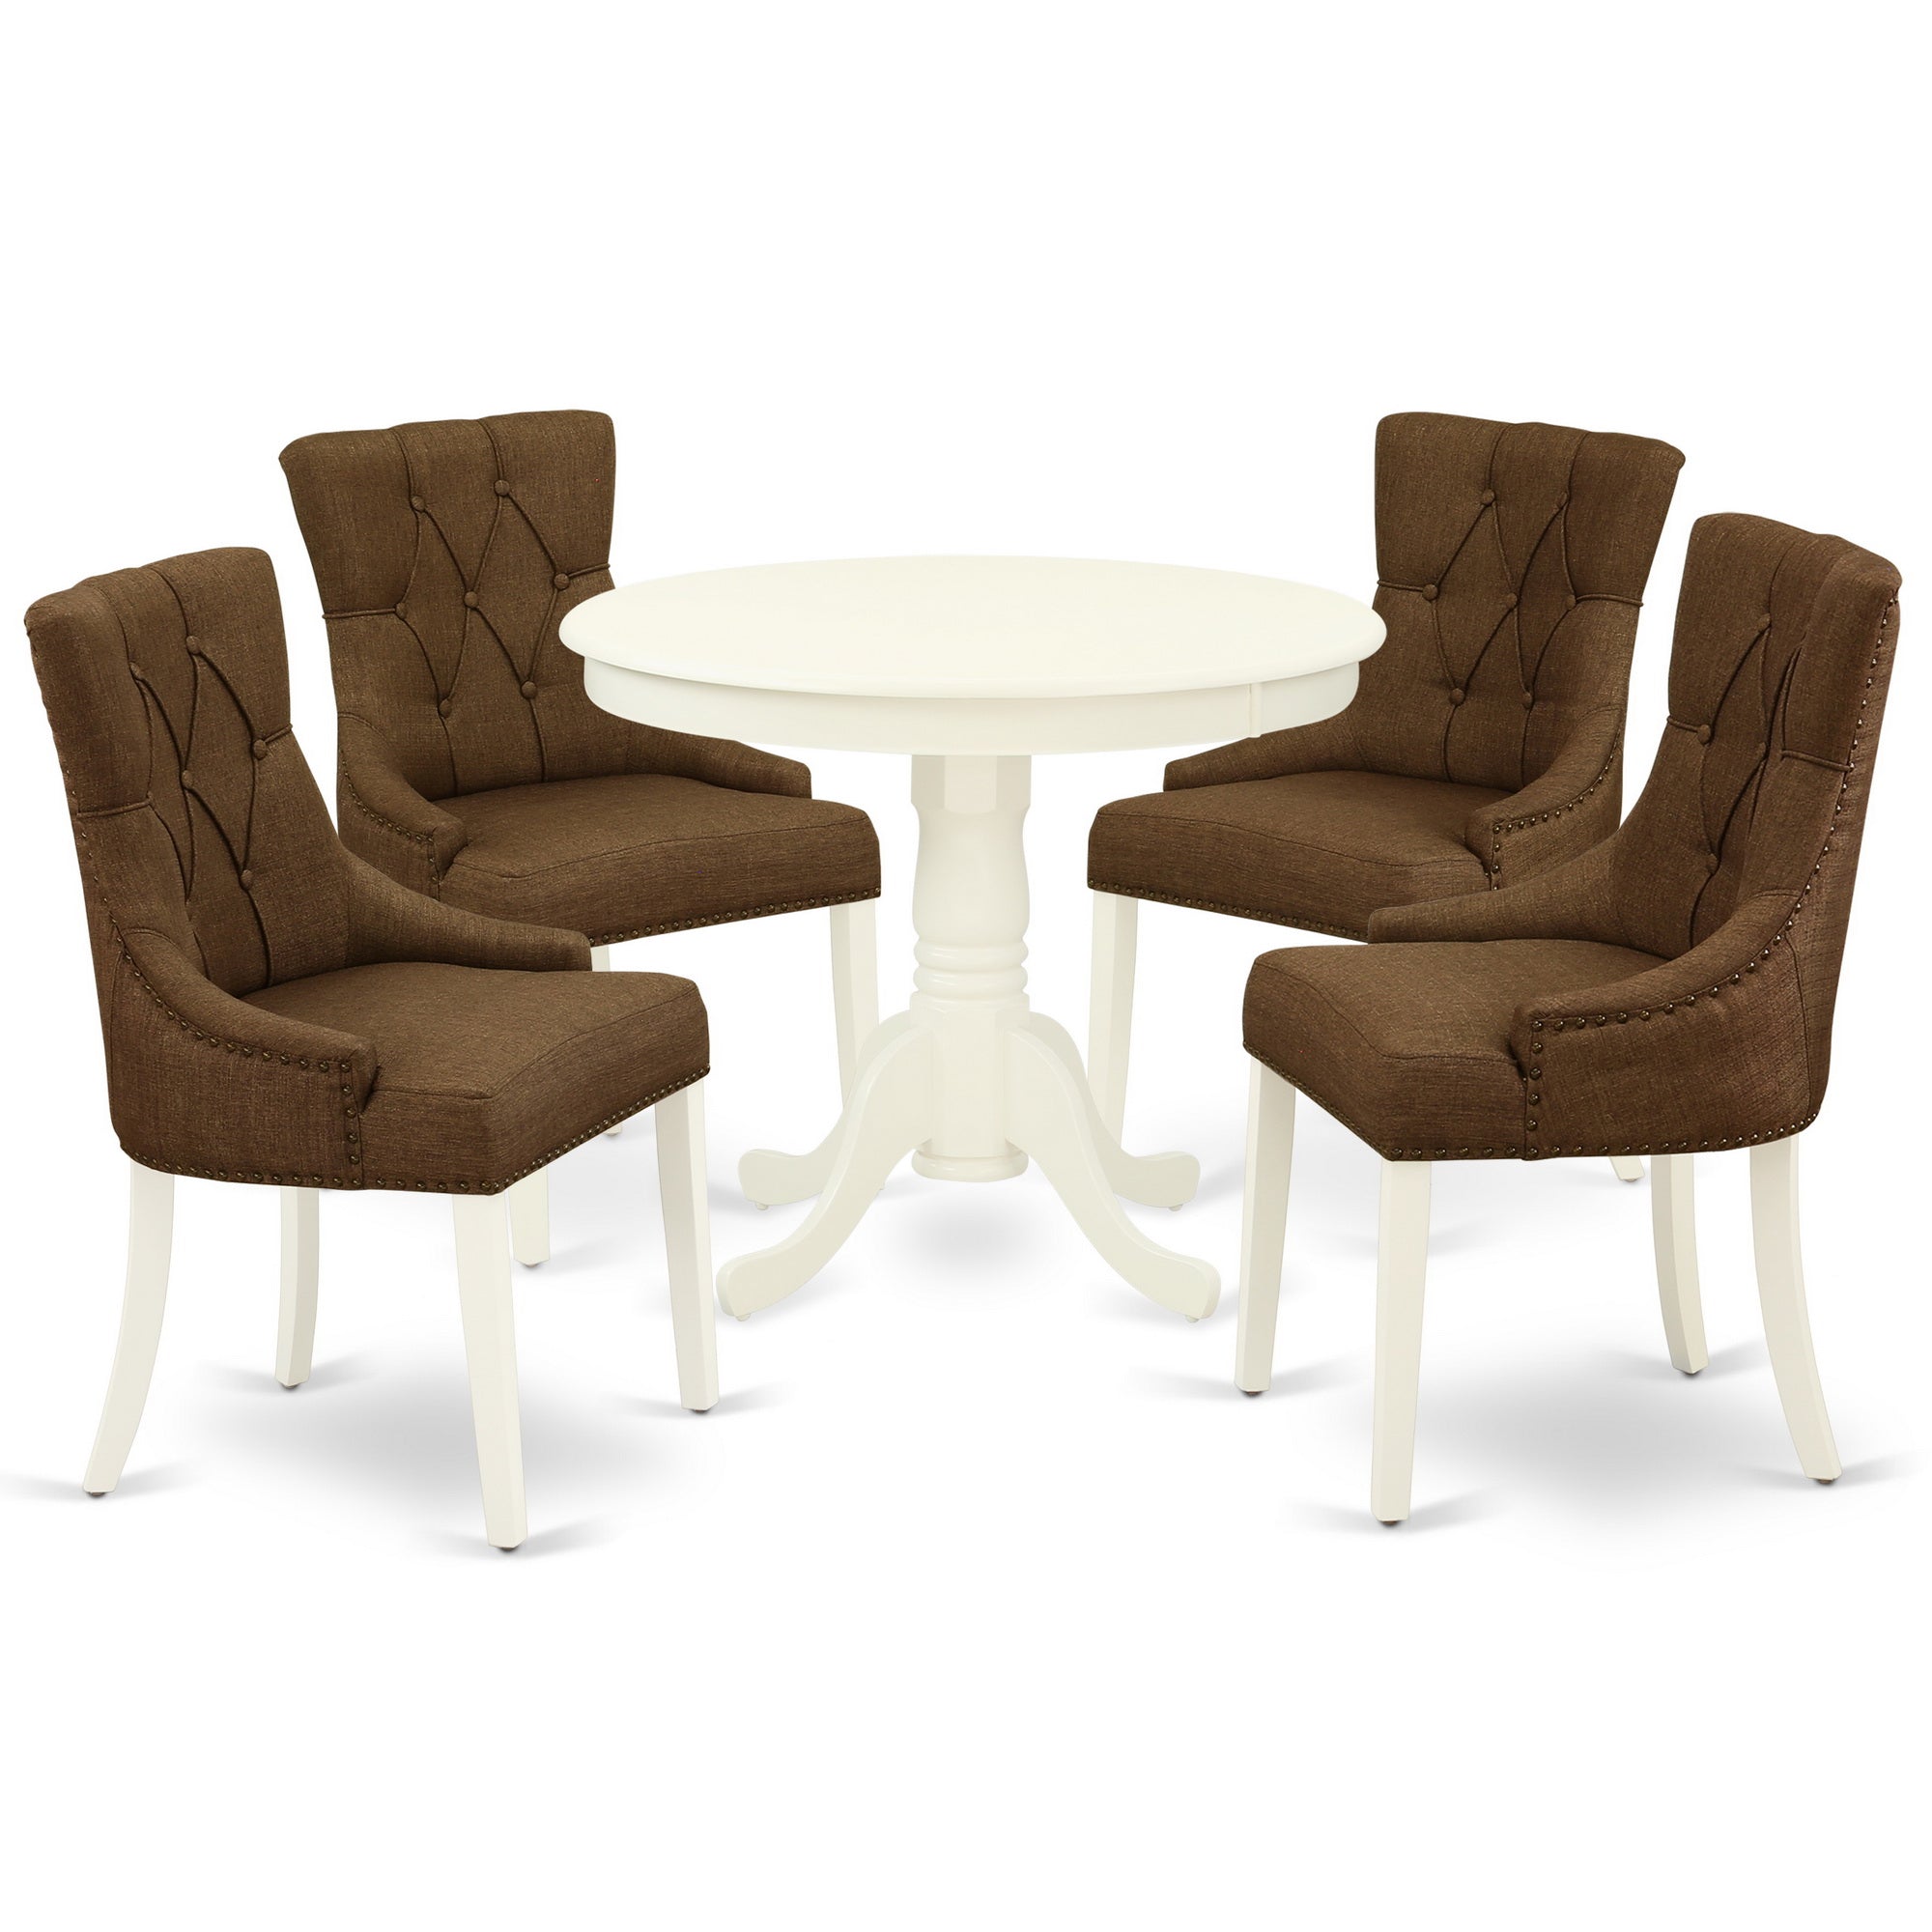 ANFR5-LWH-18 5Pc Dining Set Includes a Small Round Dinette Table and Four Parson Chairs with Dark Coffee Fabric, Linen White Finish